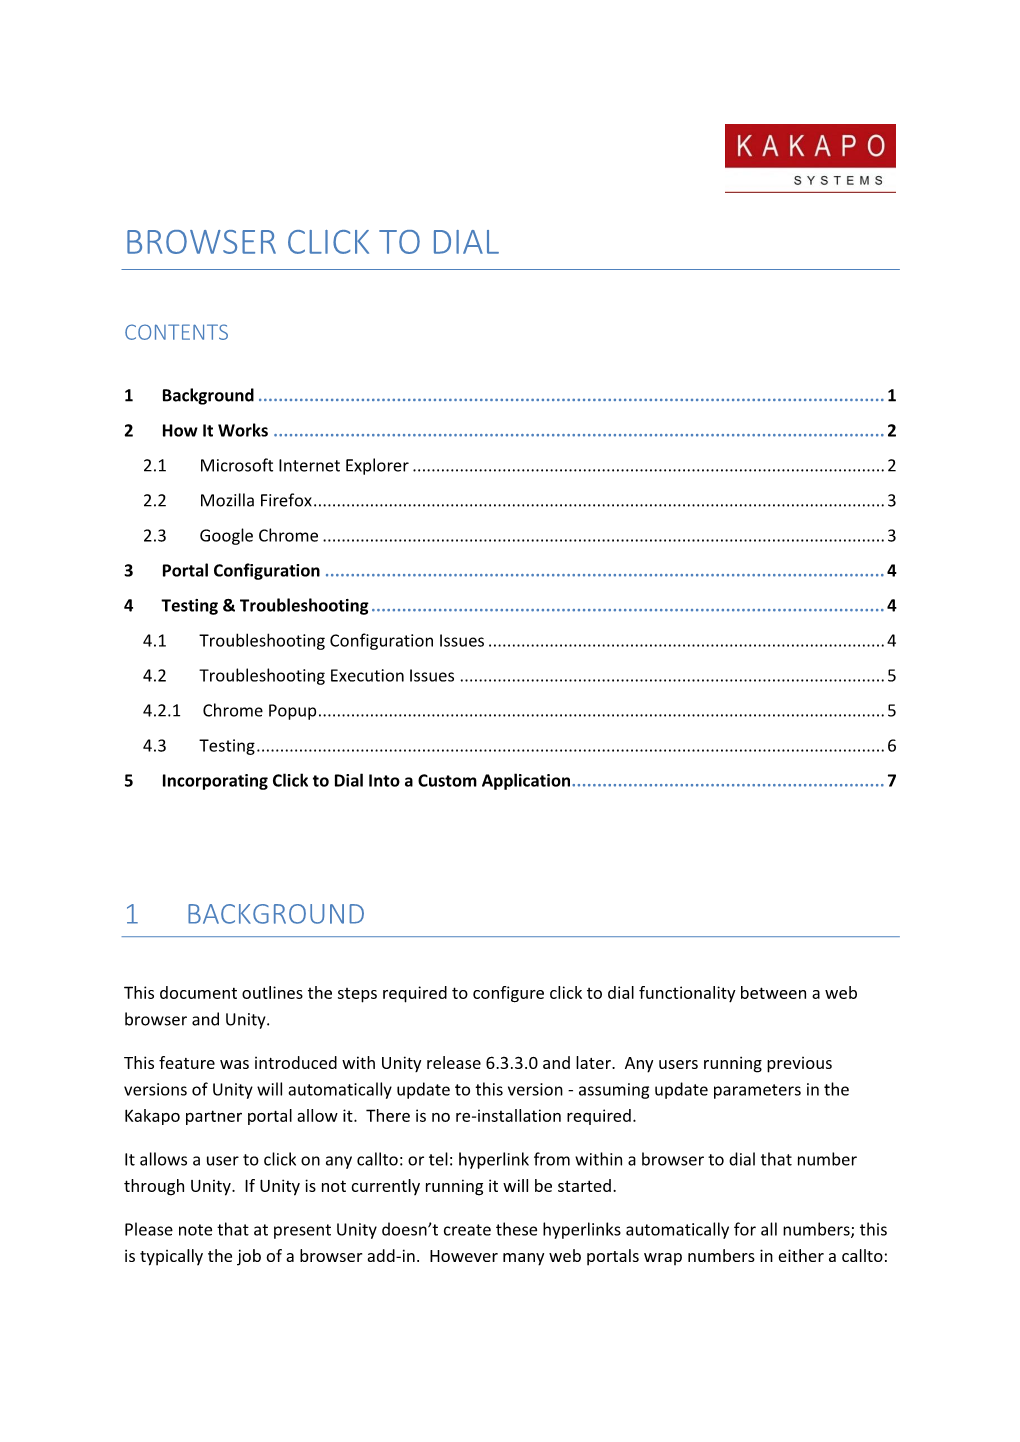 Browser Click to Dial